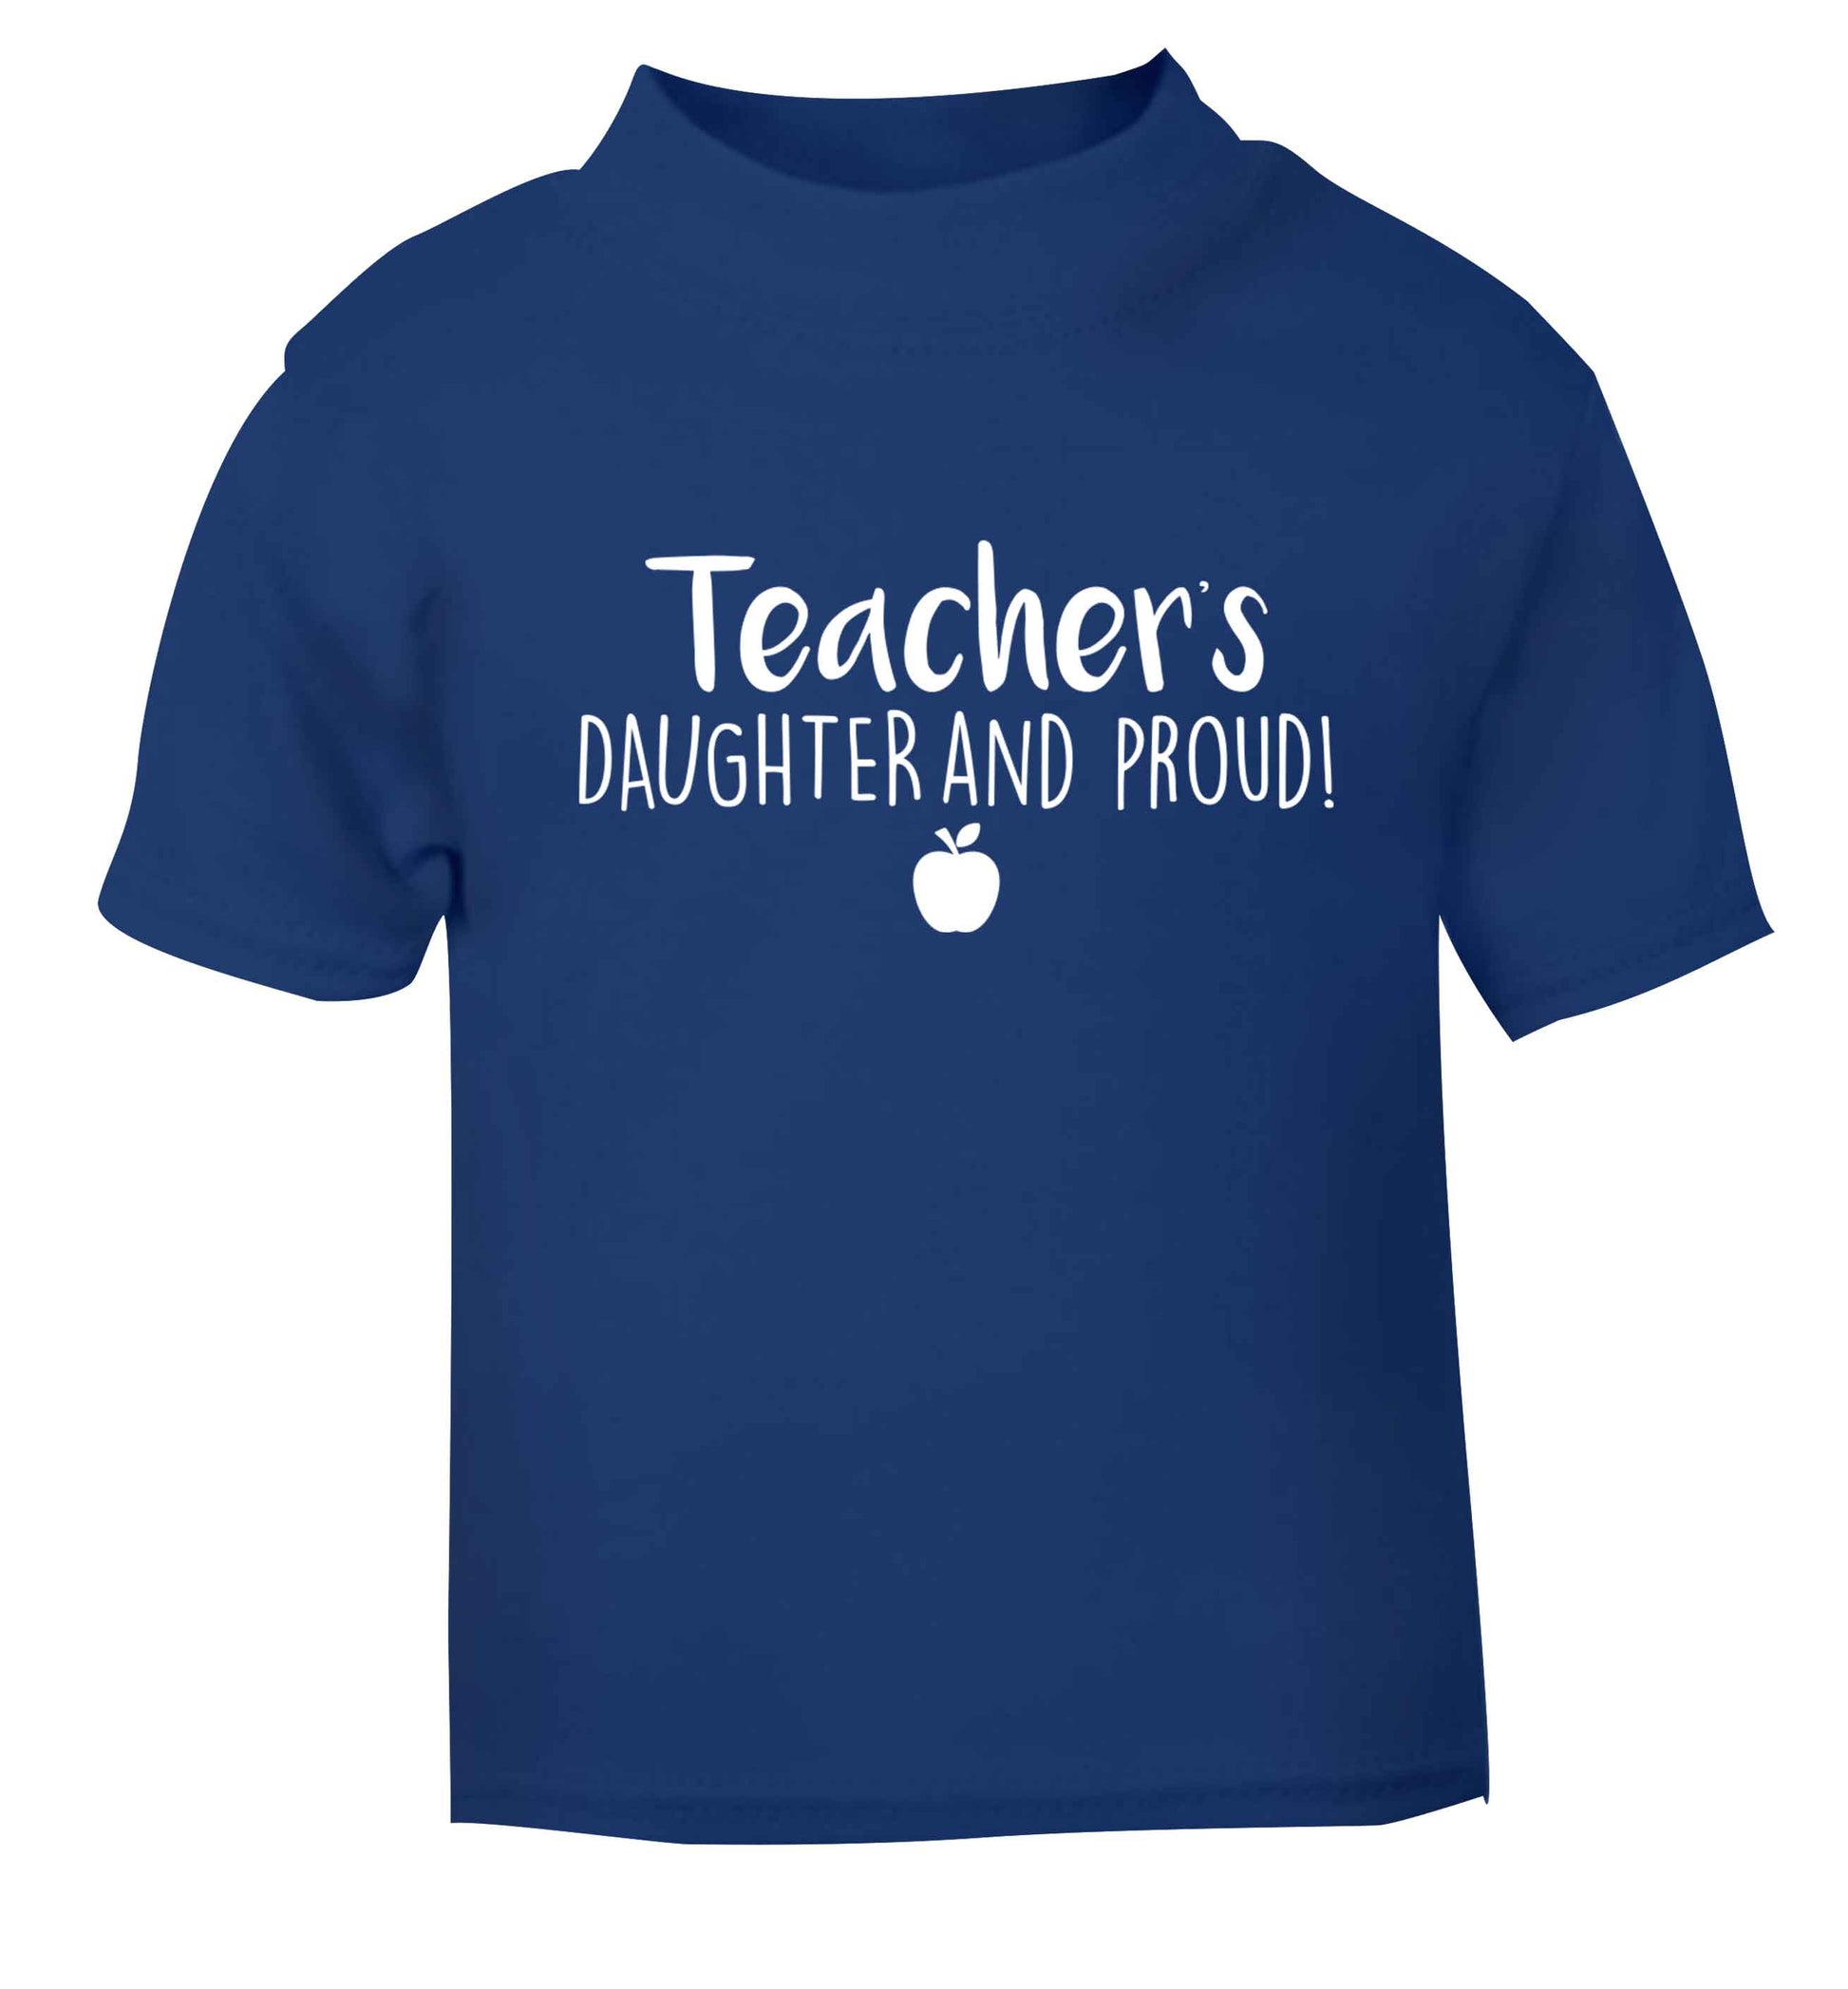 Teachers daughter and proud blue baby toddler Tshirt 2 Years